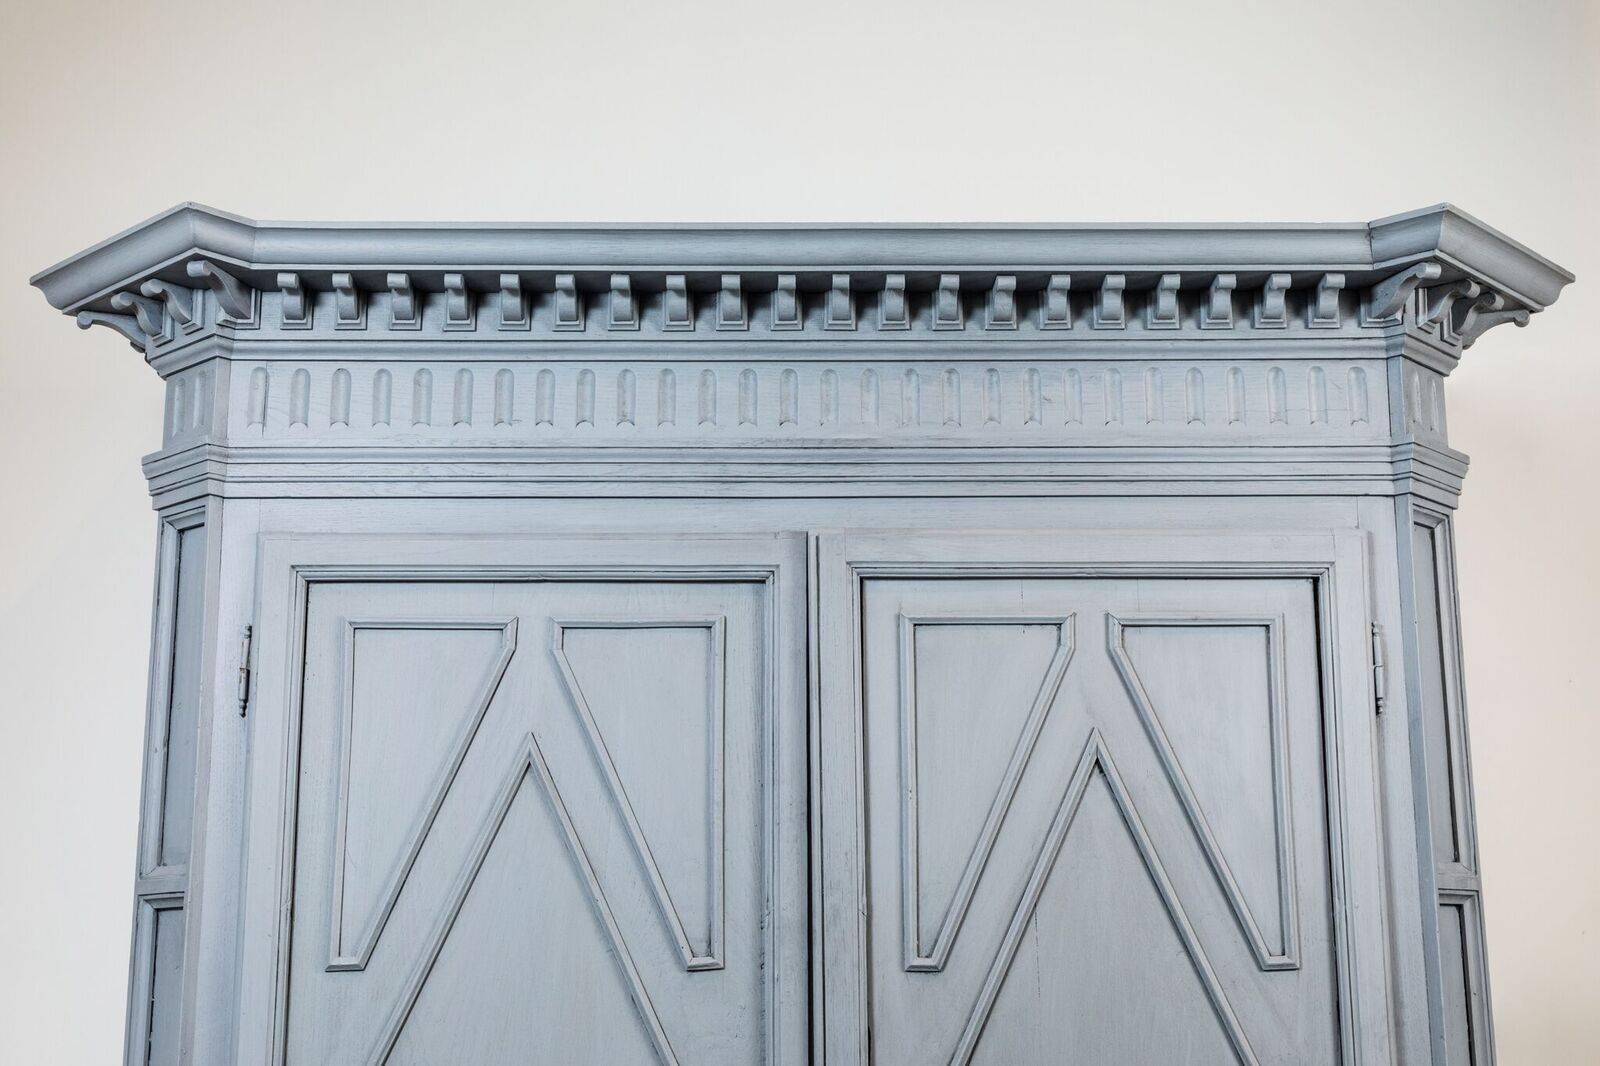 c. 1810, clipped corner, deux corp cabinet featuring a richly carved, overhanging, toothed cornice. The whole, newly painted in a matte, steel blue.